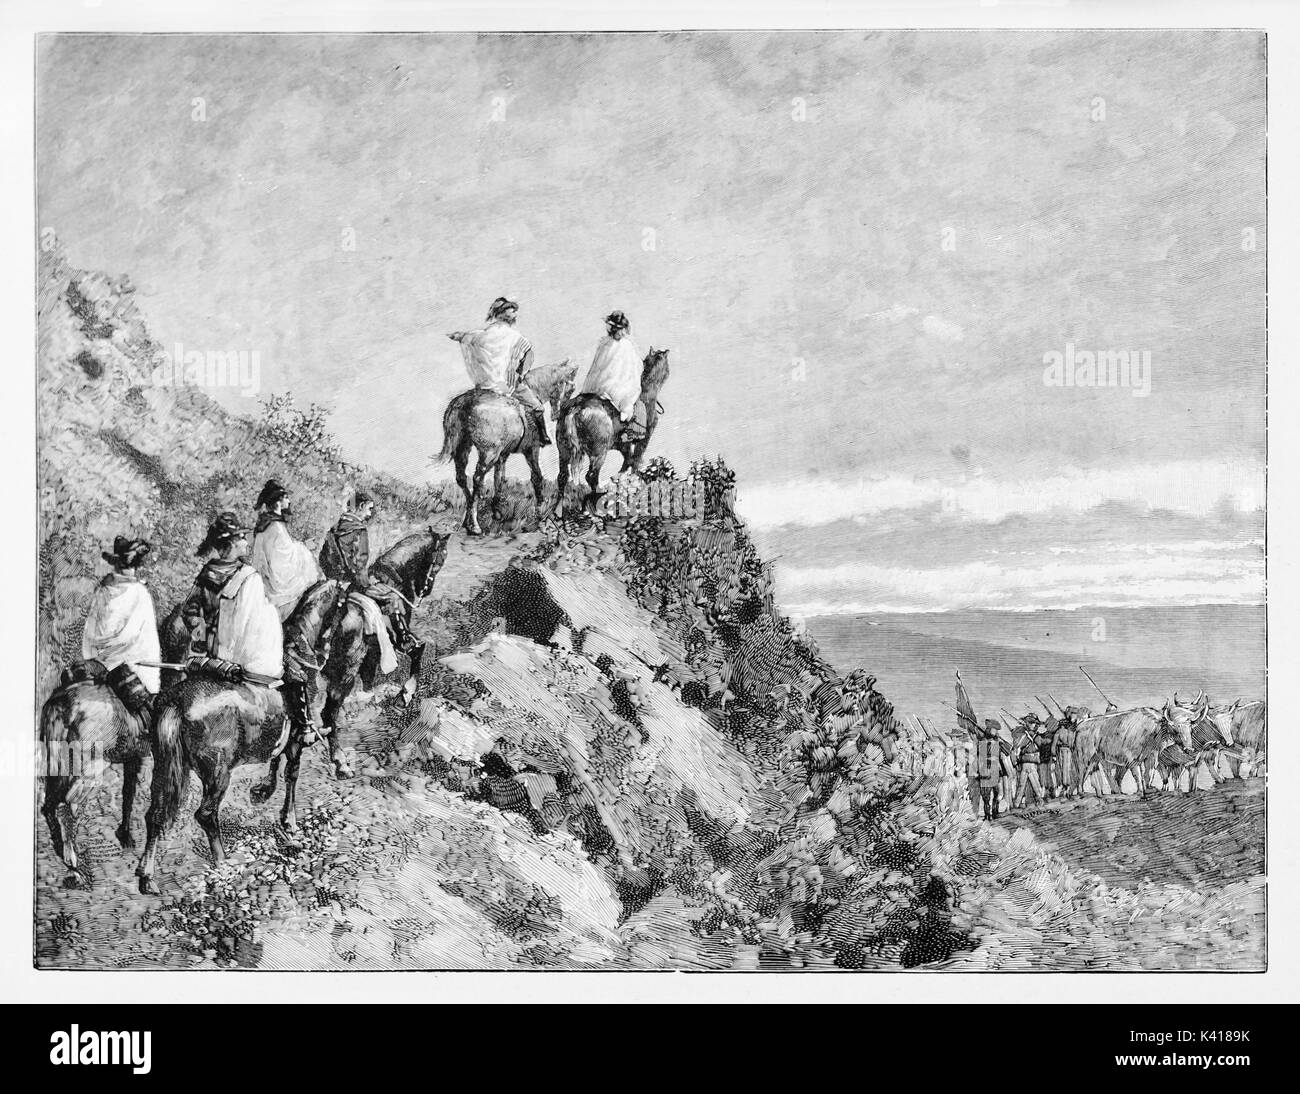 Ancient soldiers in back view climbing a hill on horse on a sunset context. Garibaldi retreat on Monte Luna leaving Rome. By E. Matania published on Garibaldi e i Suoi Tempi Milan Italy 1884 Stock Photo